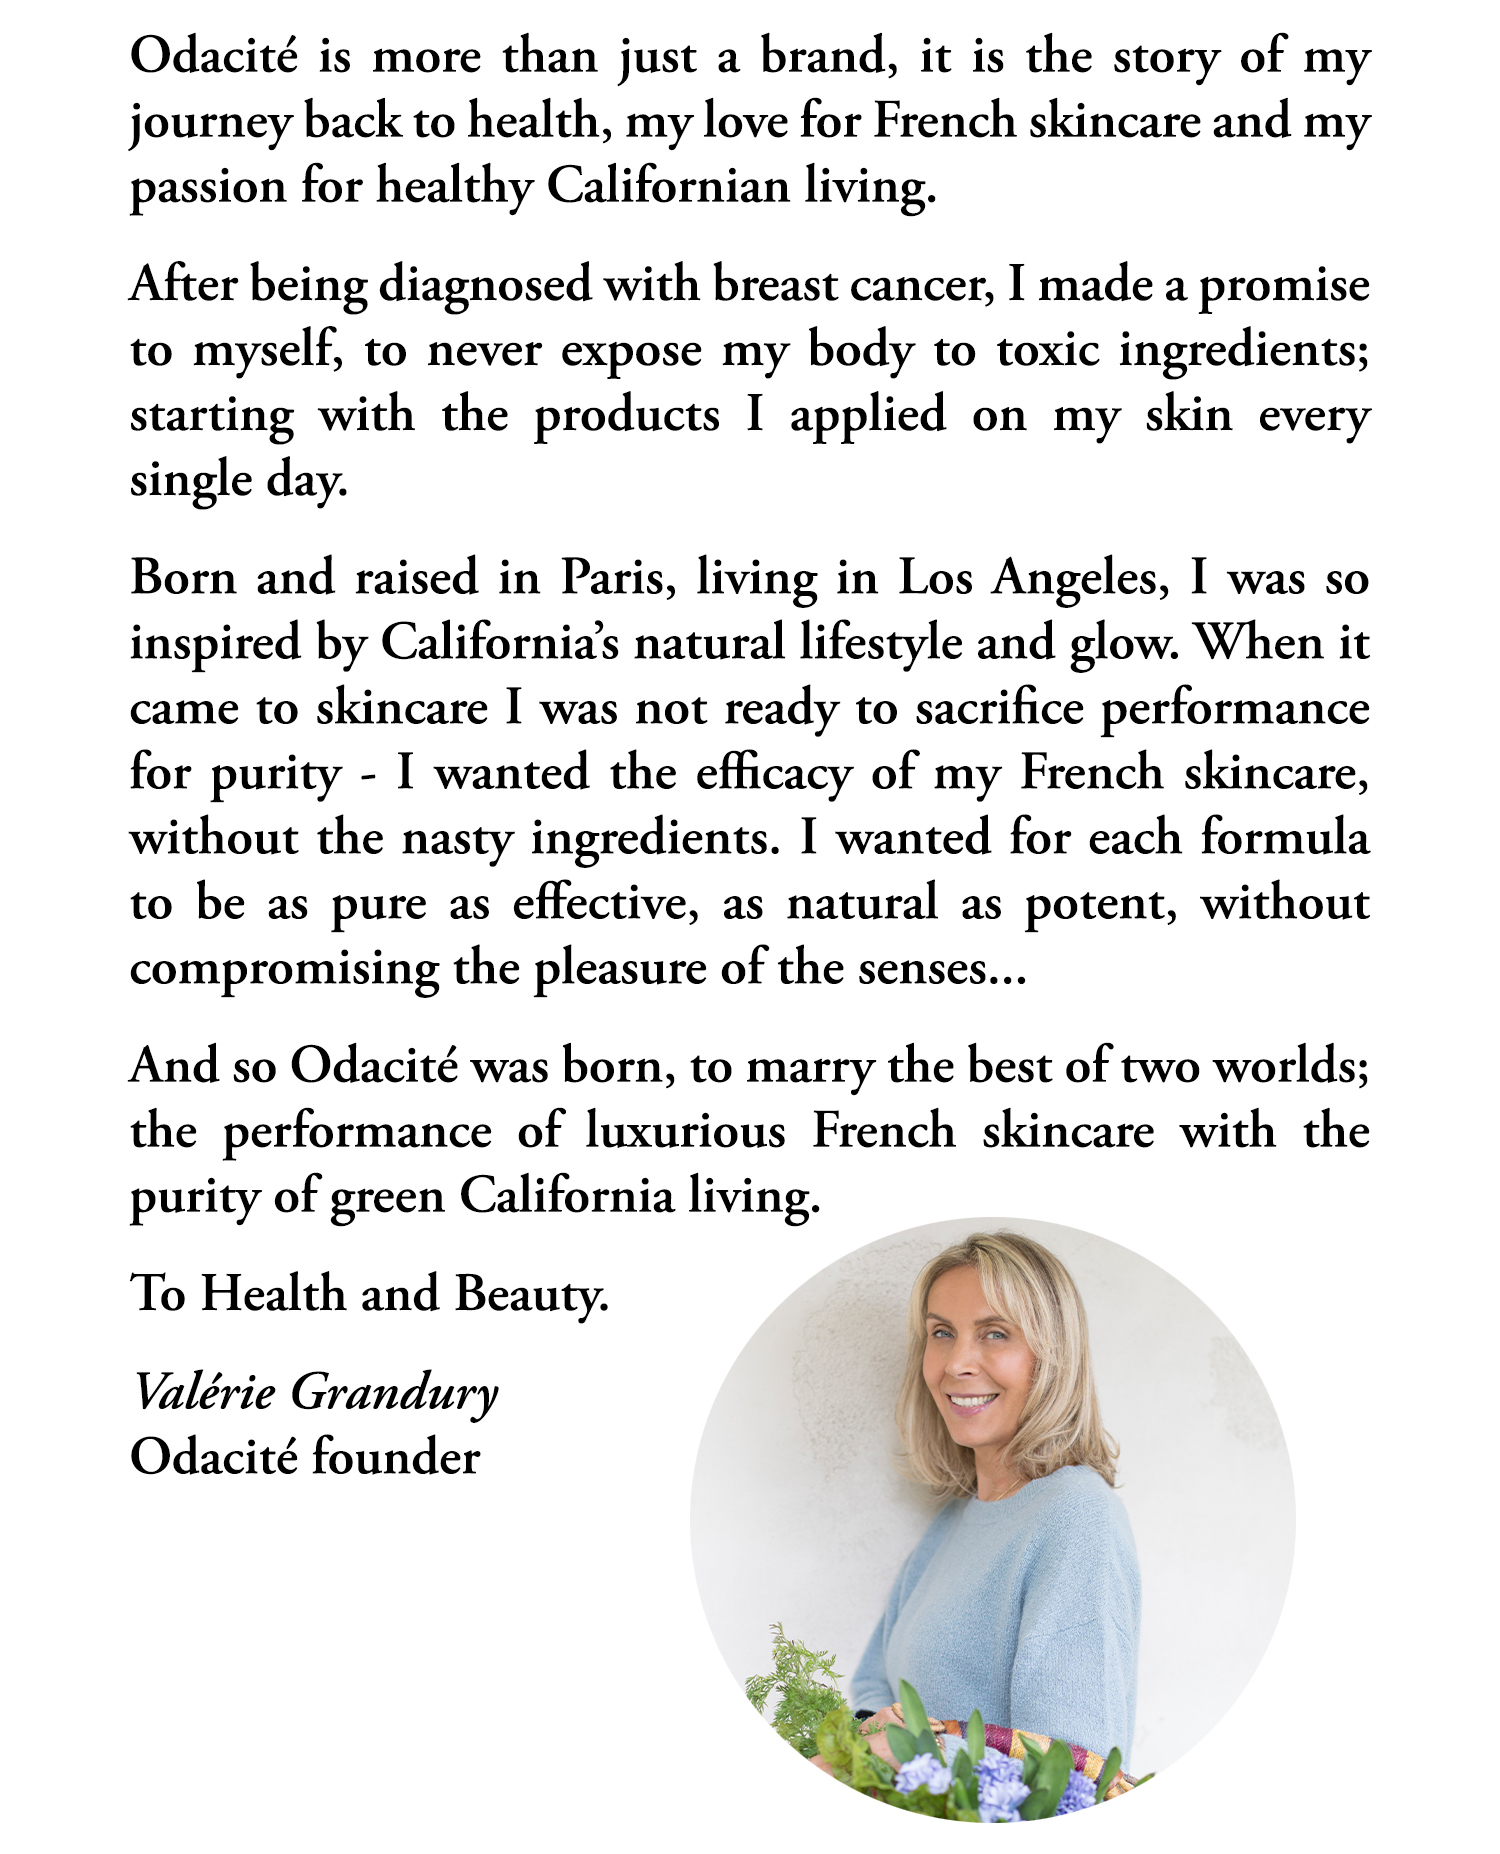 Odacite is more than just a brand, it is the story of my journey back to health, my love for French skincare and my passion for healthy Californian living.